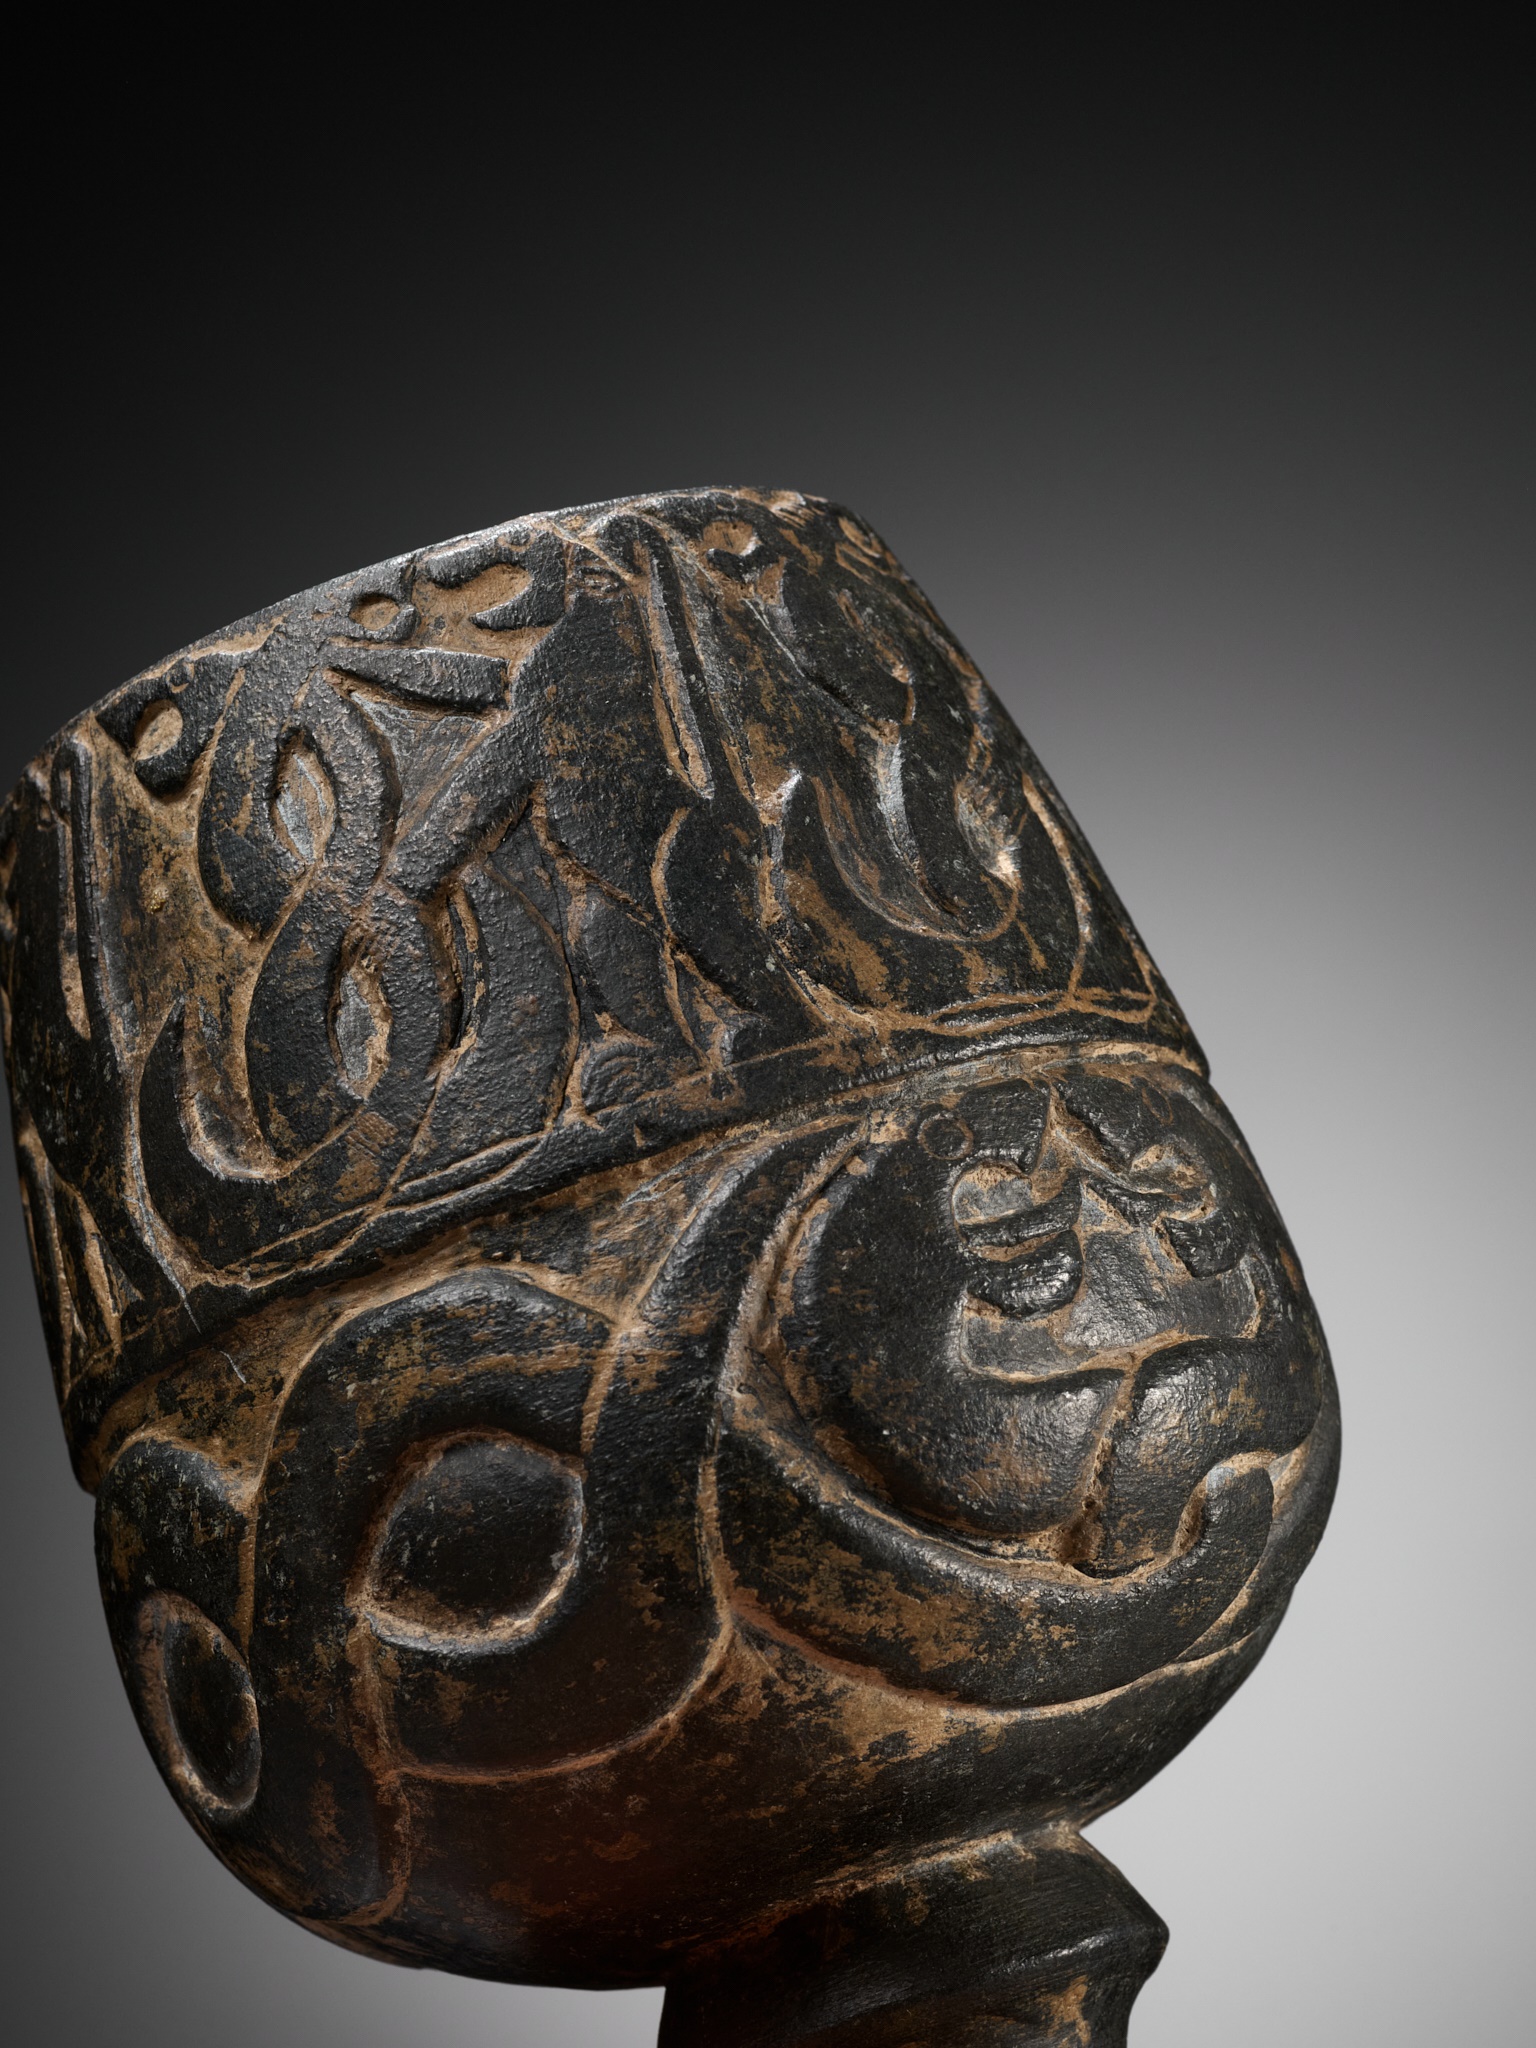 A LARGE AND HEAVY 'SNAKE AND LION' CHLORITE STEMCUP, JIROFT CULTURE, 3RD MILLENNIUM BC - Image 10 of 13